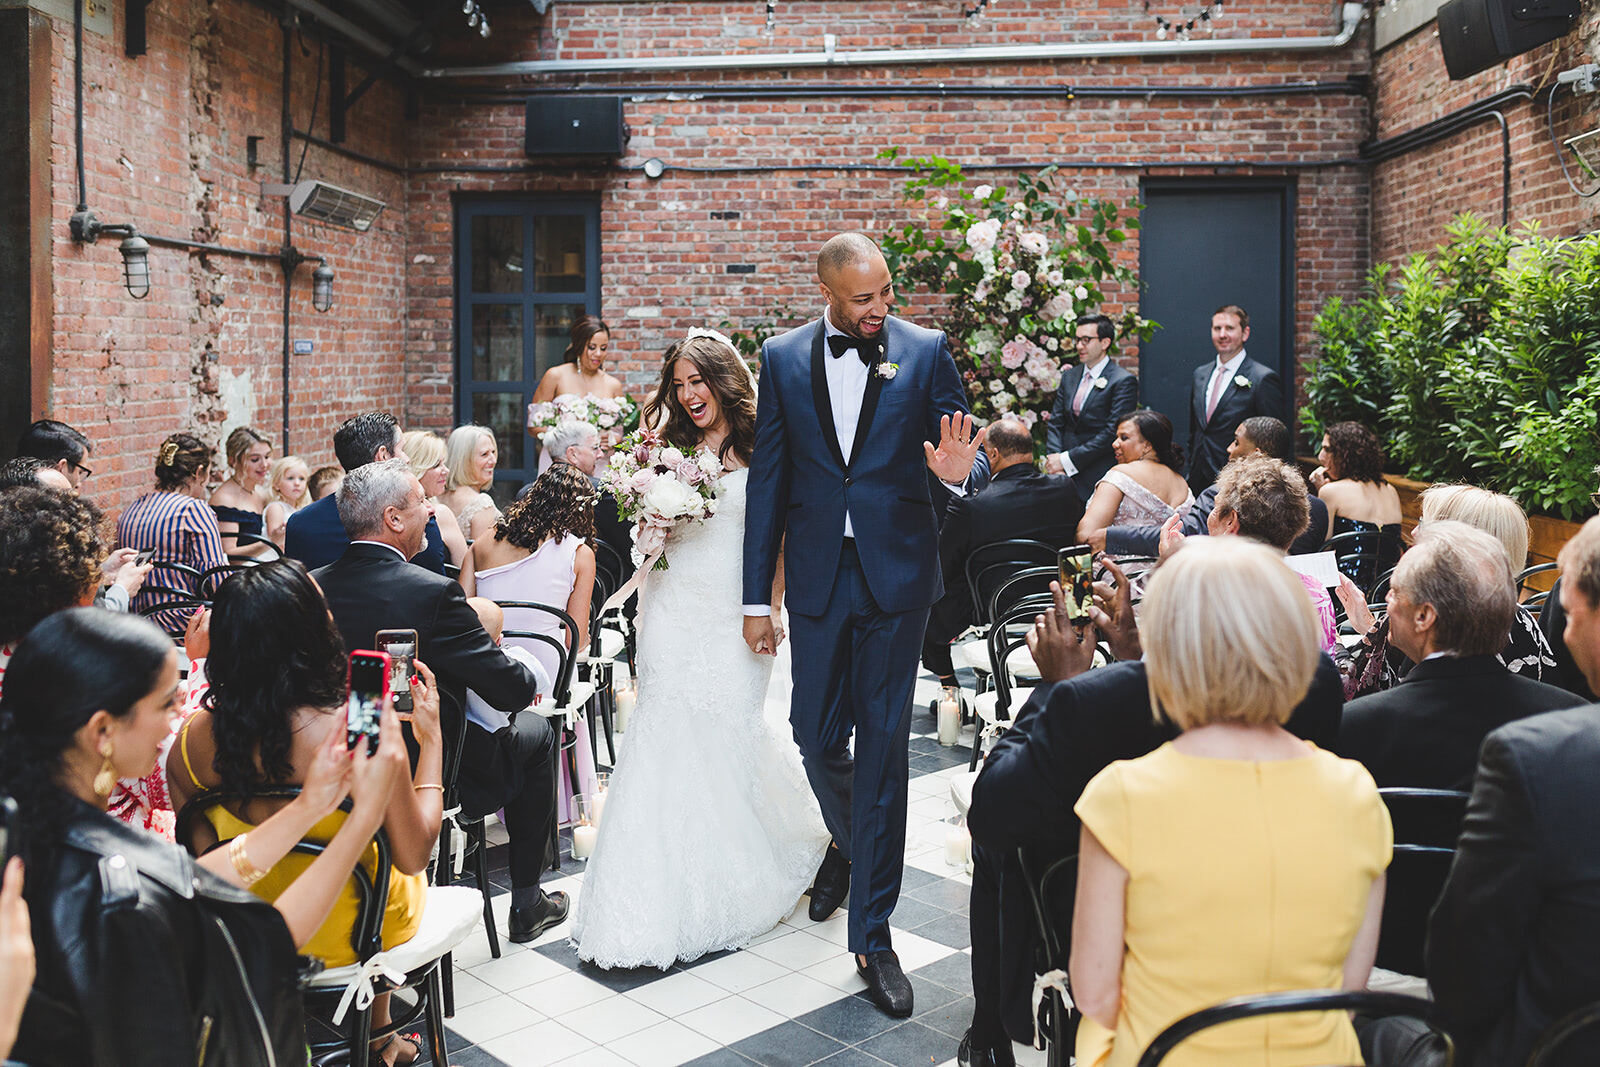 Industrial Wedding Venues: A bride and groom smiling, holding hands, and walking back down a narrow aisle together at Wythe Hotel.